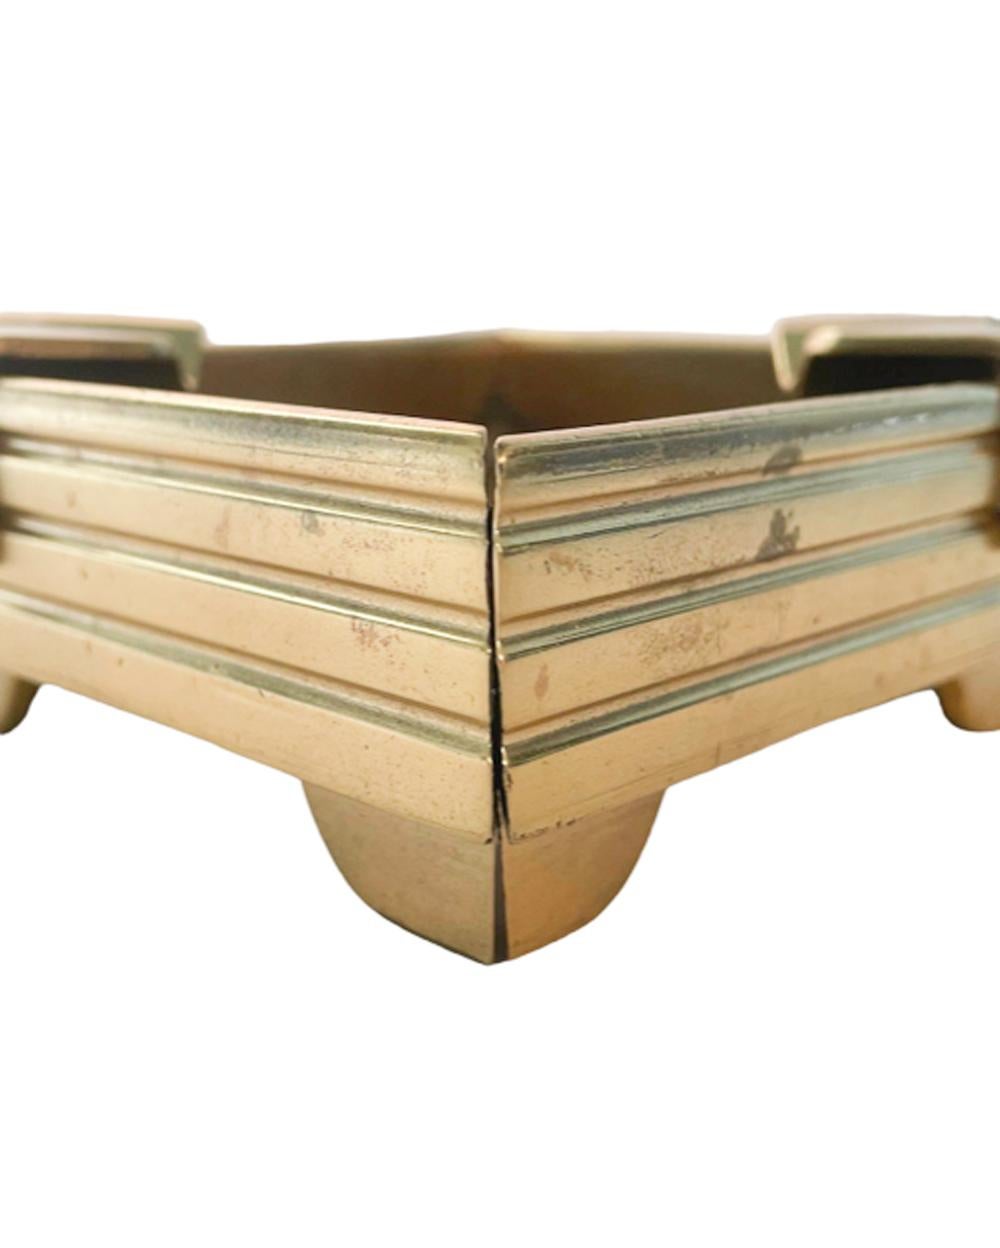 Vintage Machine Age Bronze and Nickel Ashtray / Mitered and Riveted Construction For Sale 6